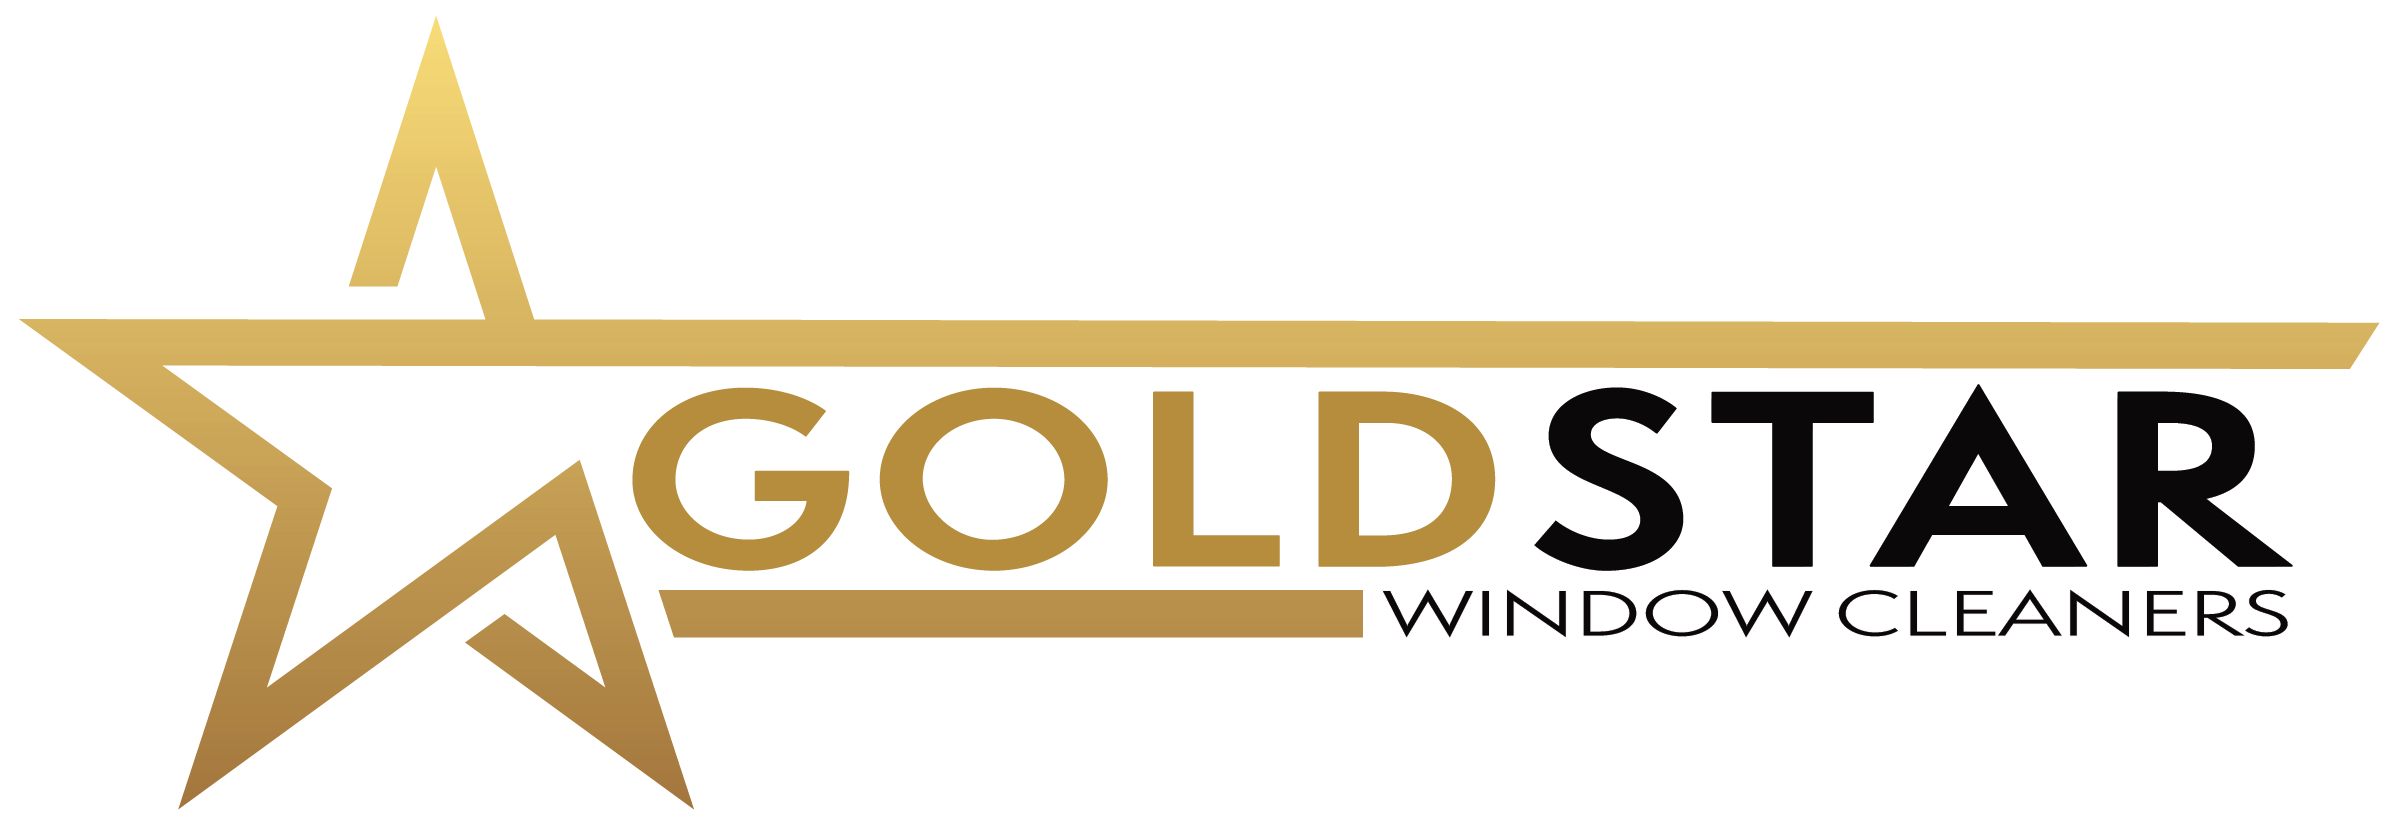 Gold Star Window Cleaners - Brainerd Lakes Area MN